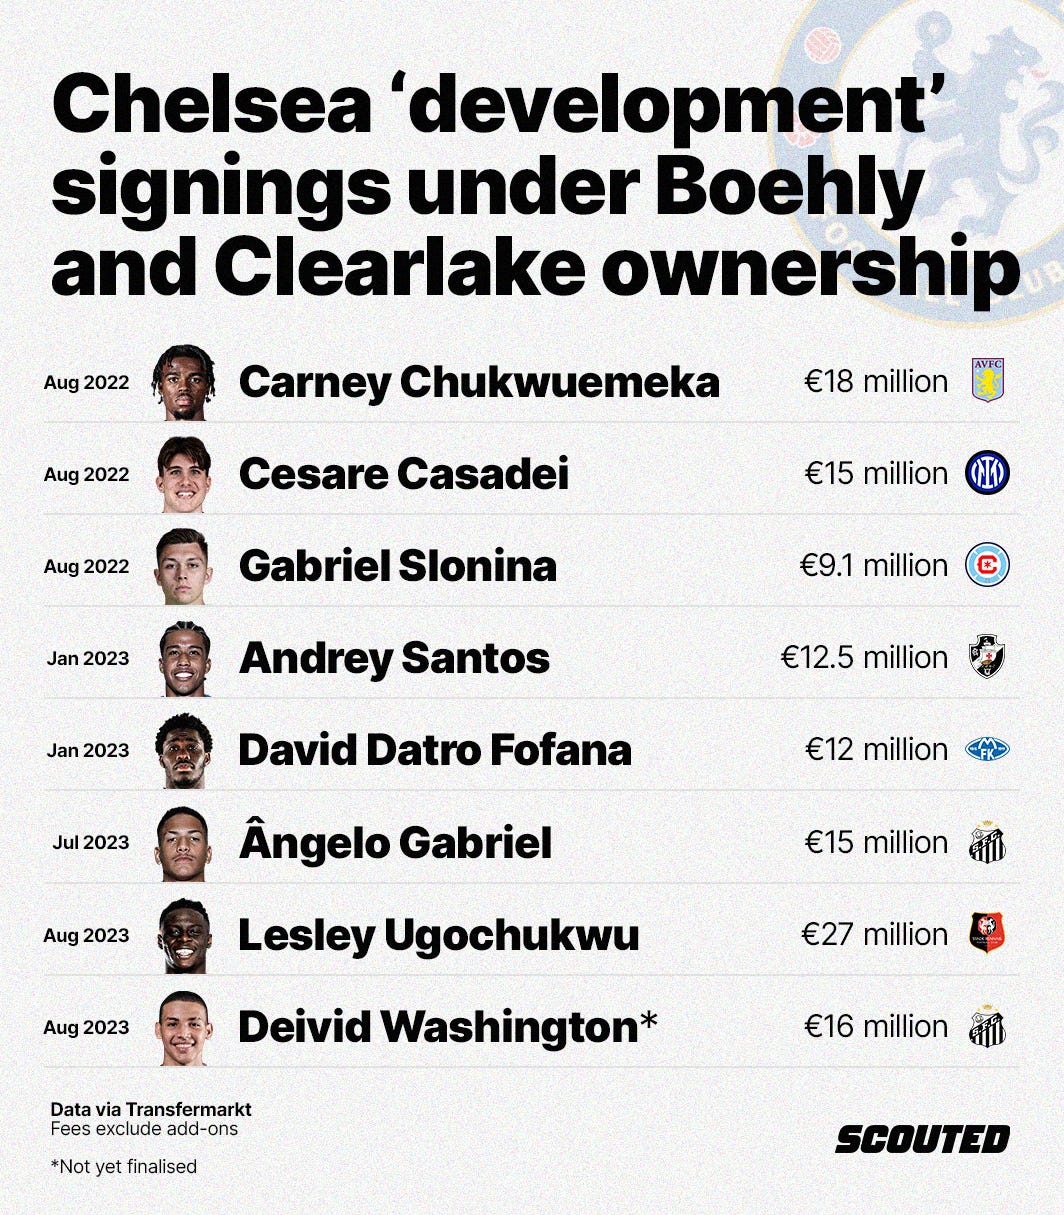 A graphic featuring a list of 'development' signings by Chelsea under Todd Boehly and Clearlake's ownership. It includes Carney Chukwuemeka, Cesare Casadei, Gabriel Slonina, Andrey Santos, David Datro Fofana, Angelo Gabriel, Lesley Ugochukwu and Deivid Washington